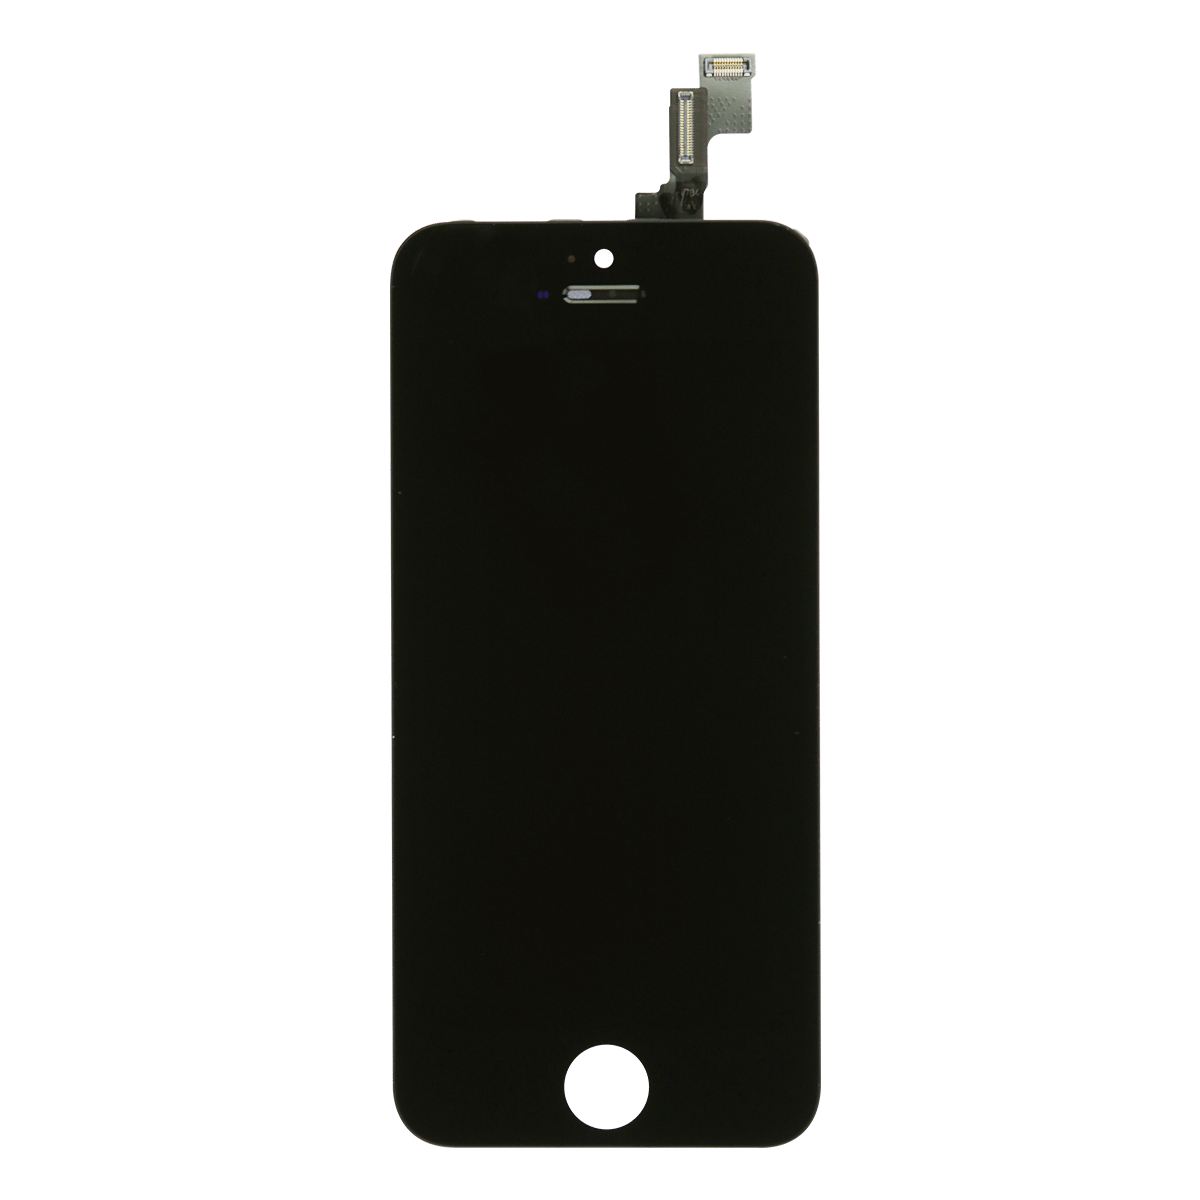 iPhone 5s LCD and Touch Screen Replacement